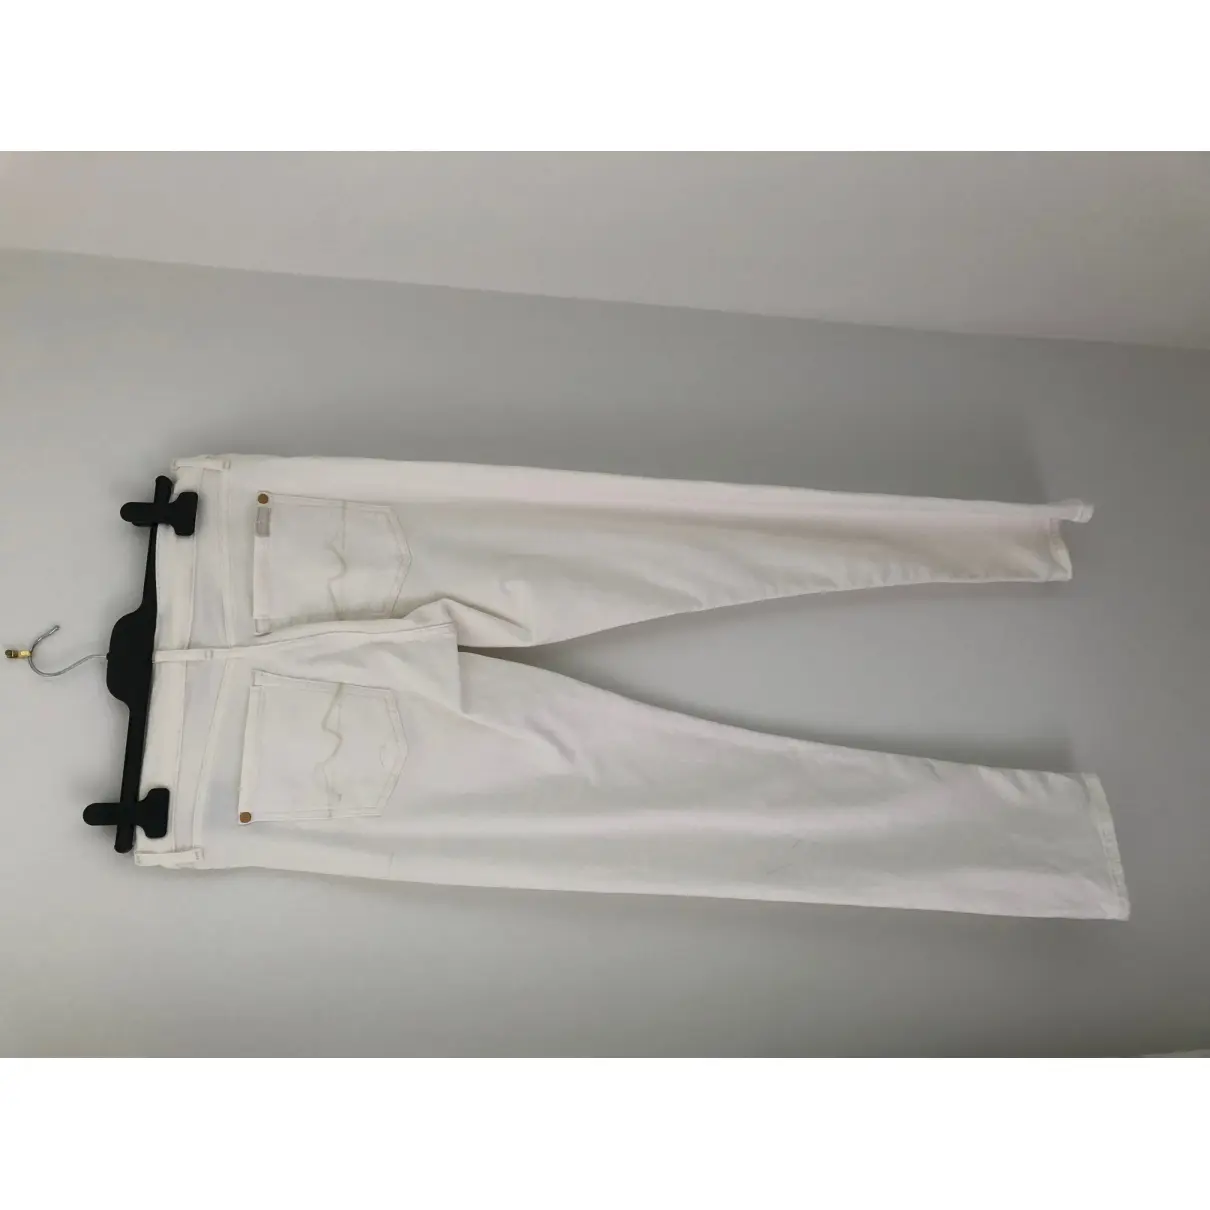 Buy 7 For All Mankind White Cotton Jeans online